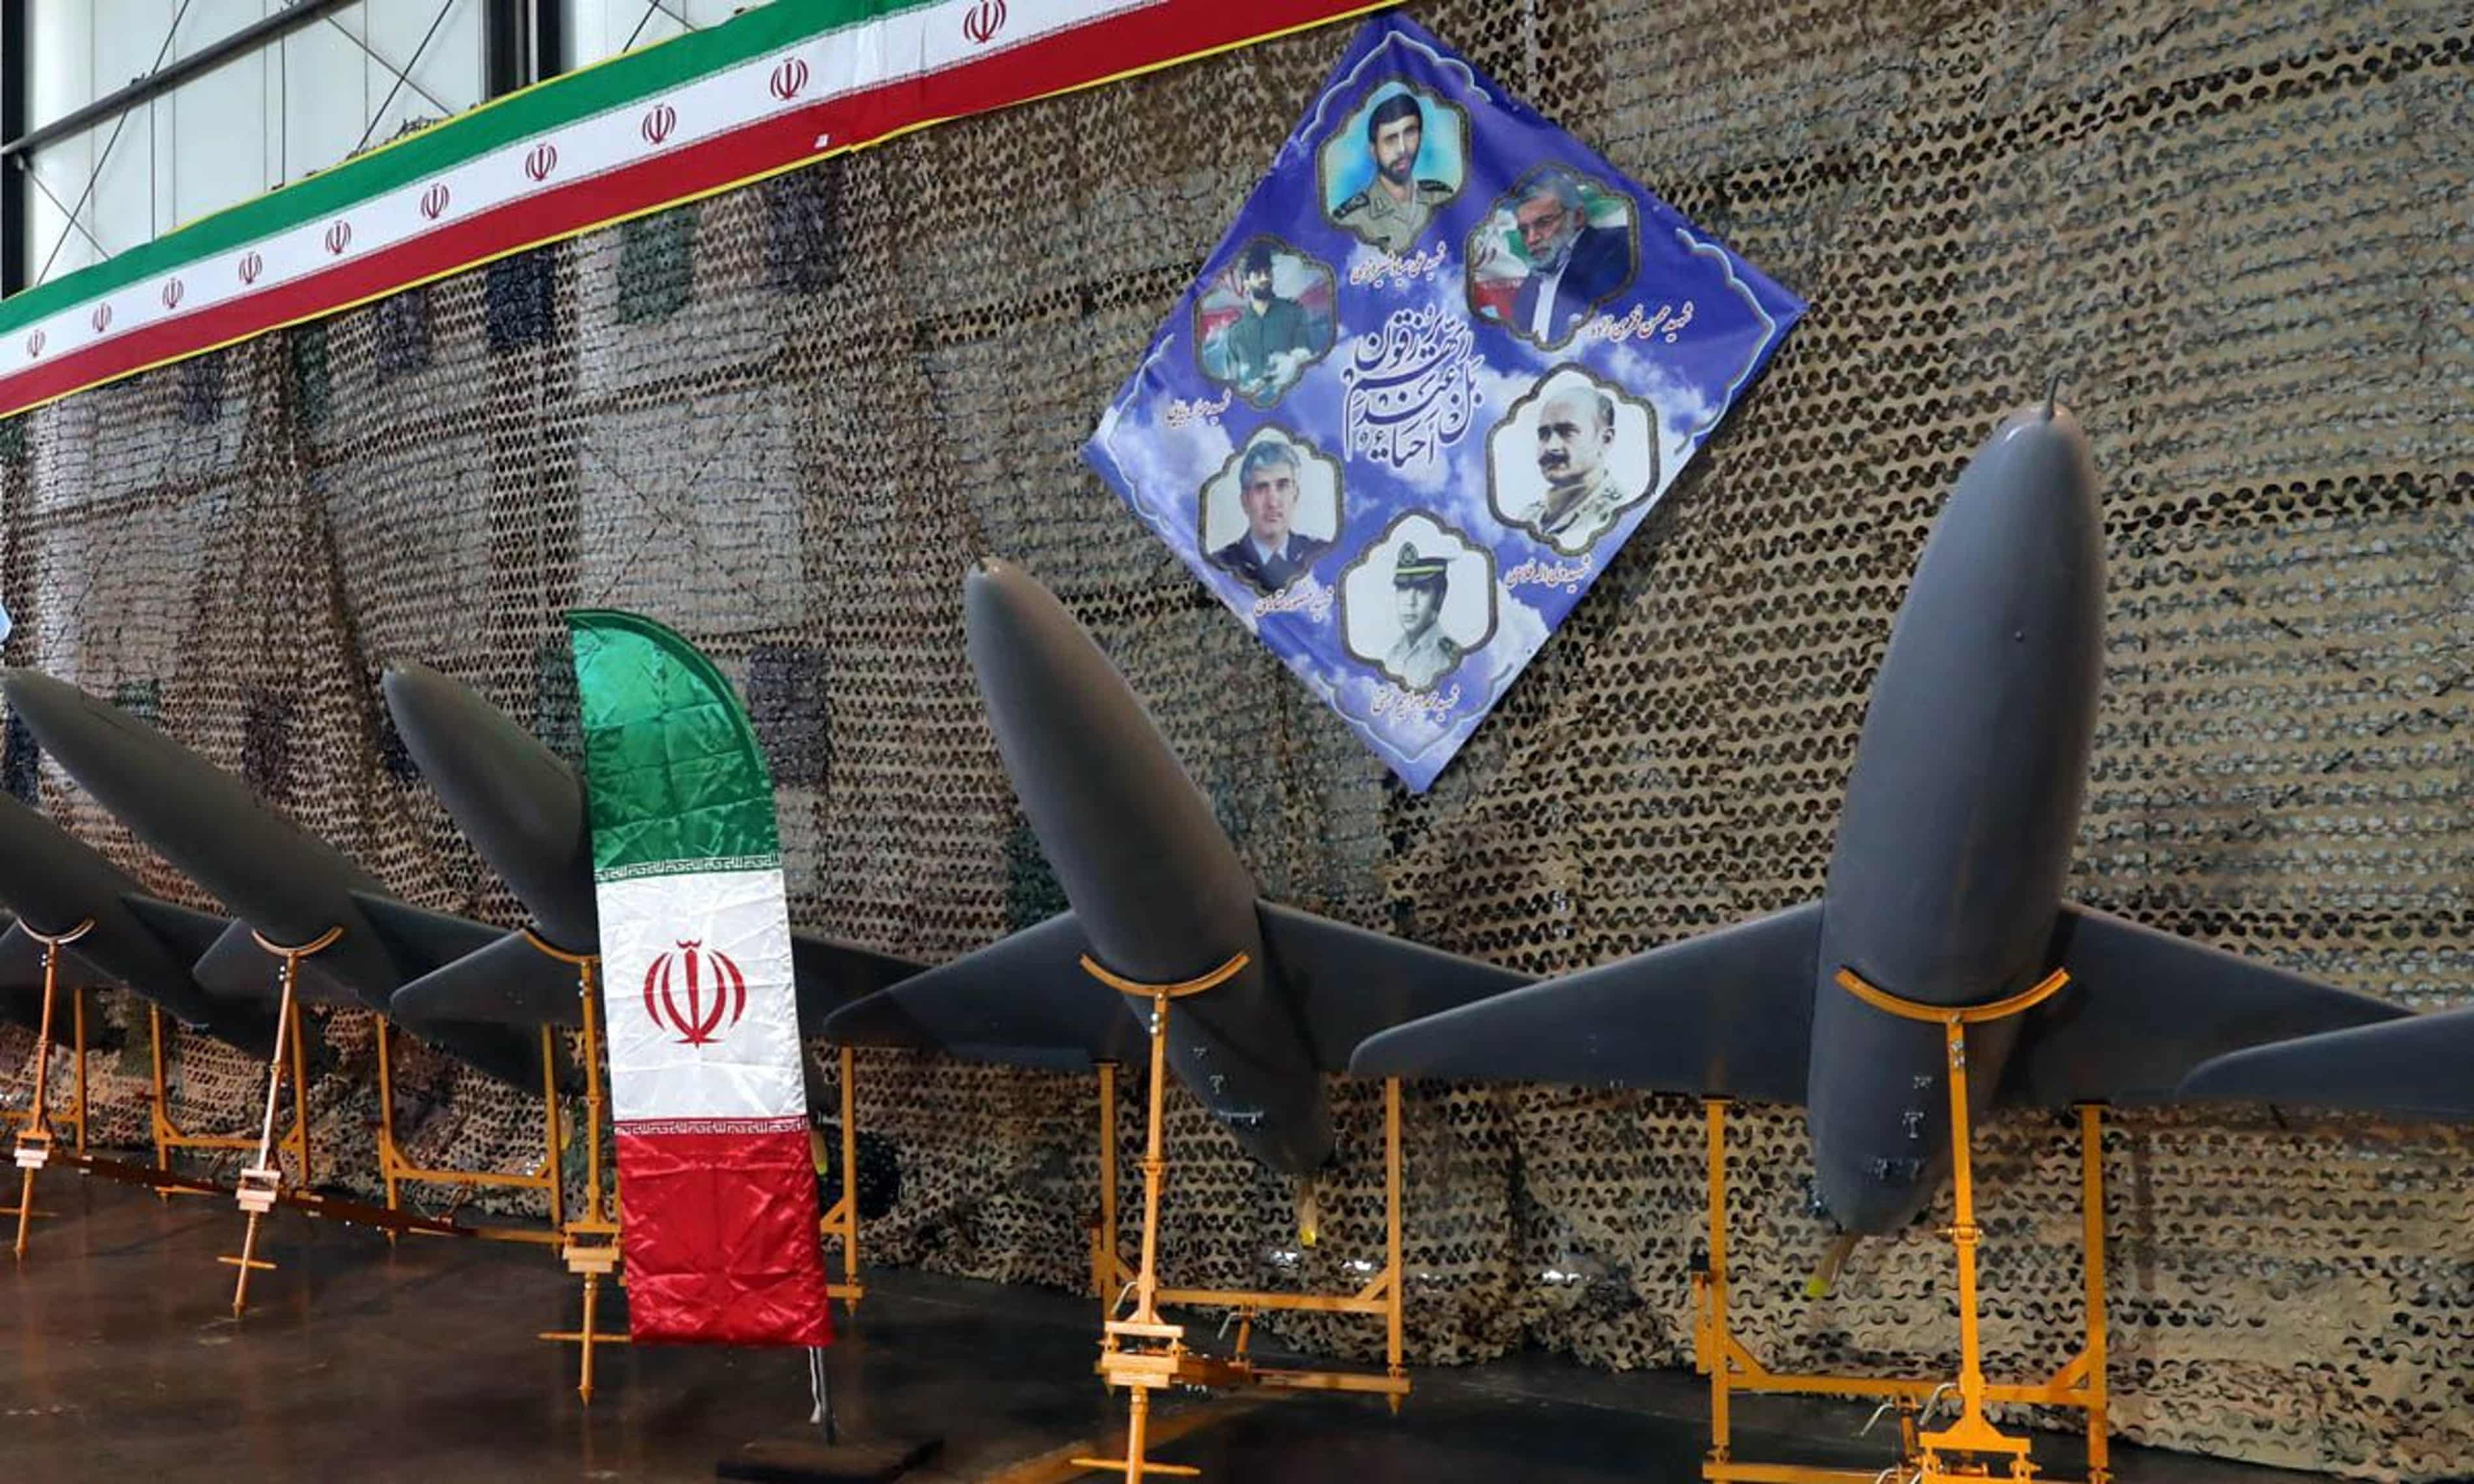 Academics in US, UK and Australia collaborated on drone research with Iranian university close to regime (theguardian.com)